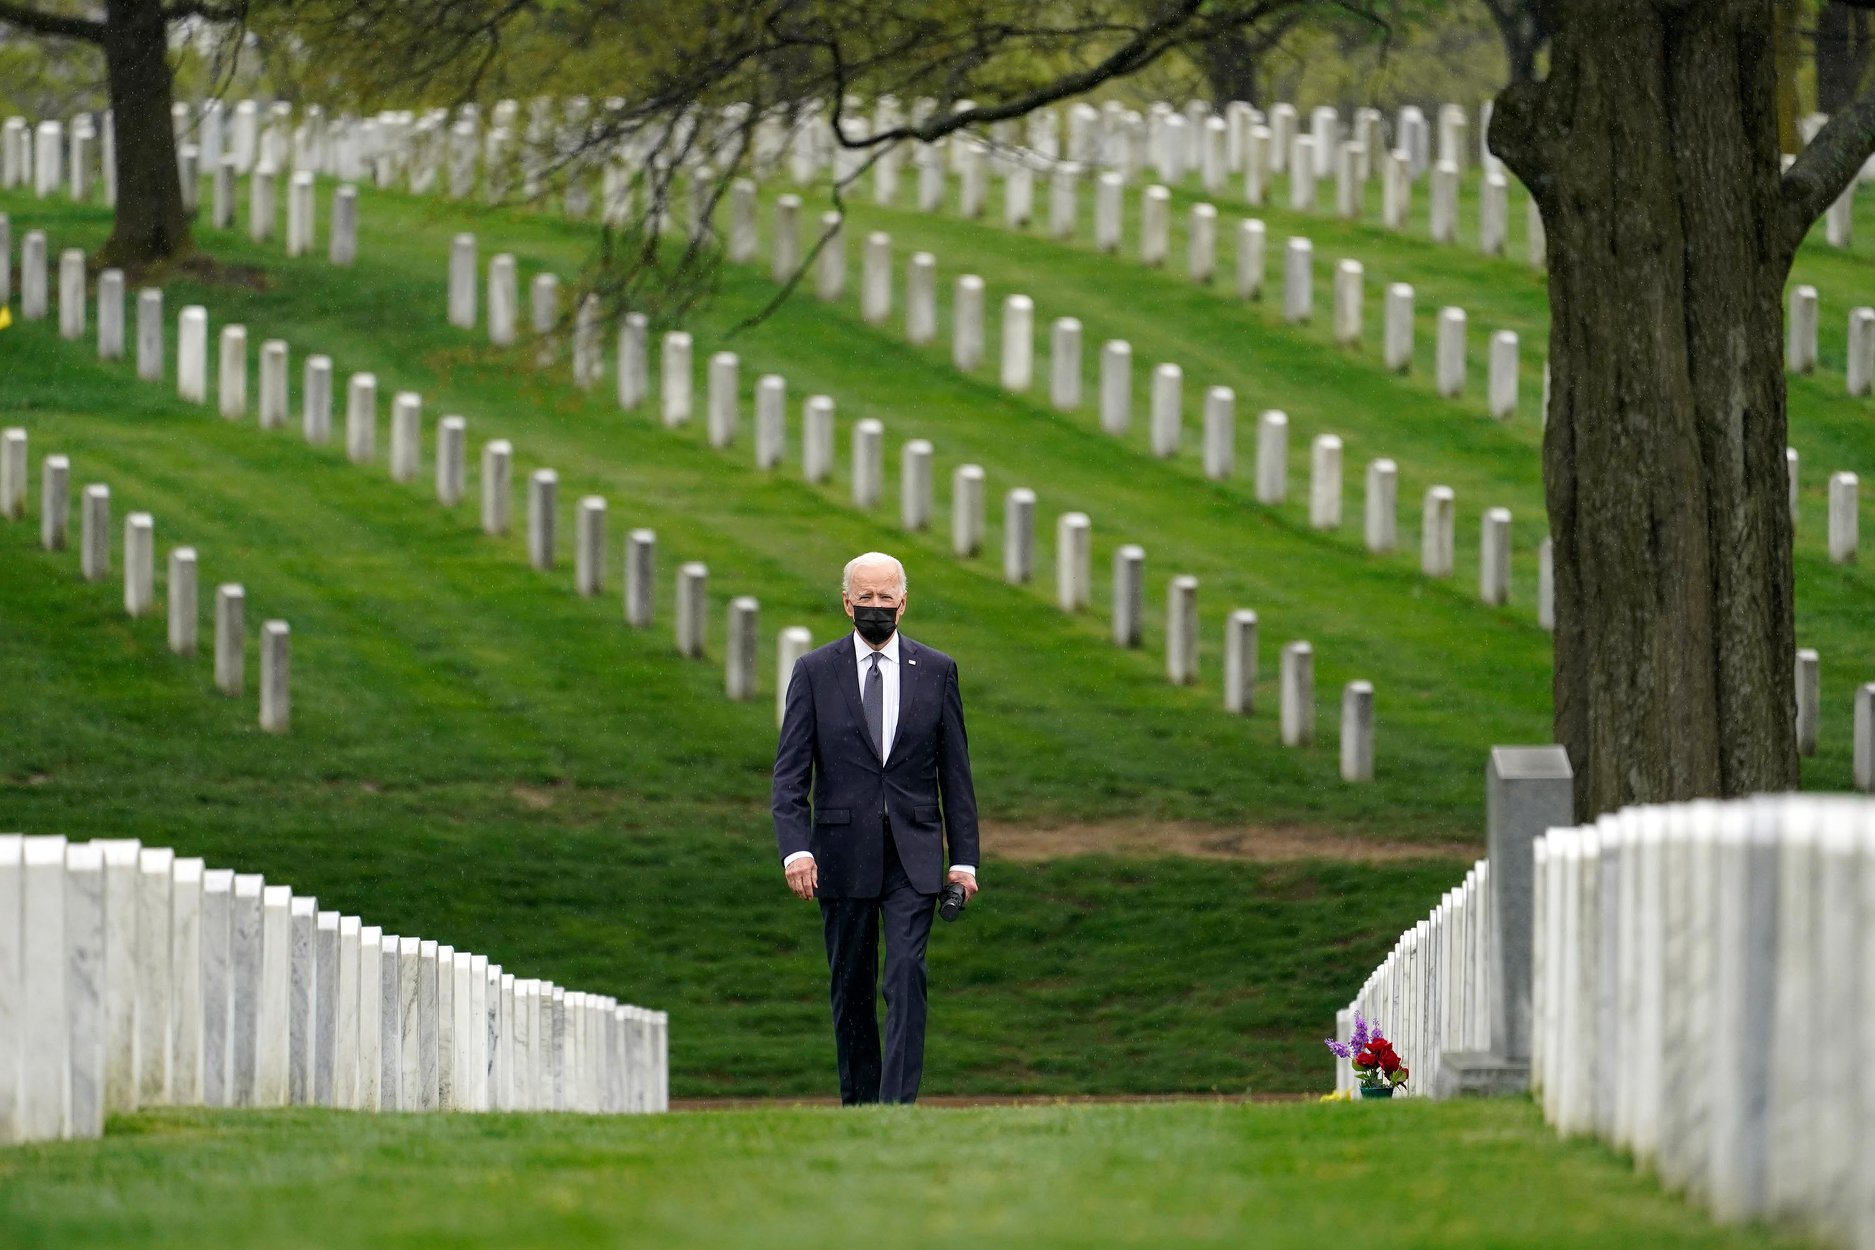 President Joe Biden walks through Arlington National Cemetery. The grass is green, the precision with which the tomb stones are placed is unmistakable. 